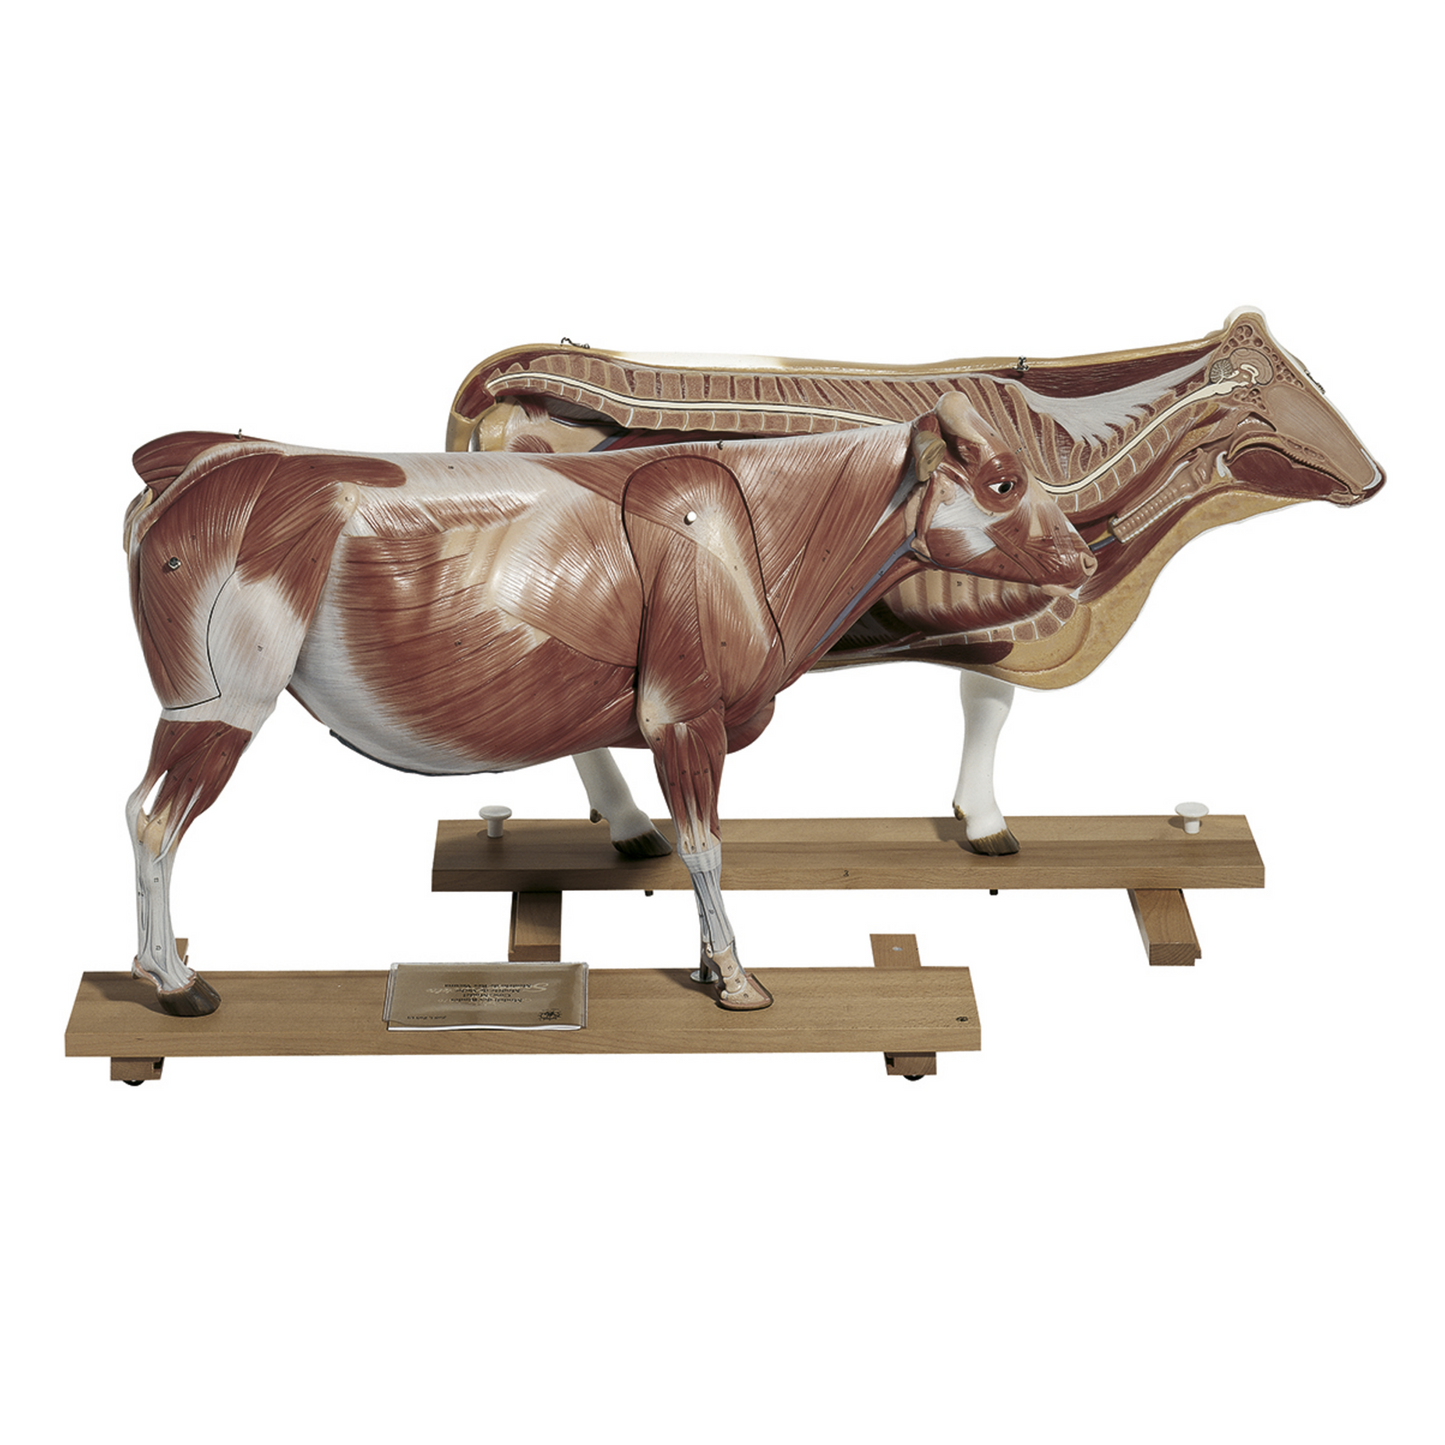 Model of a cow in the highest quality and 1/3 of life size. Can be separated into 13 parts